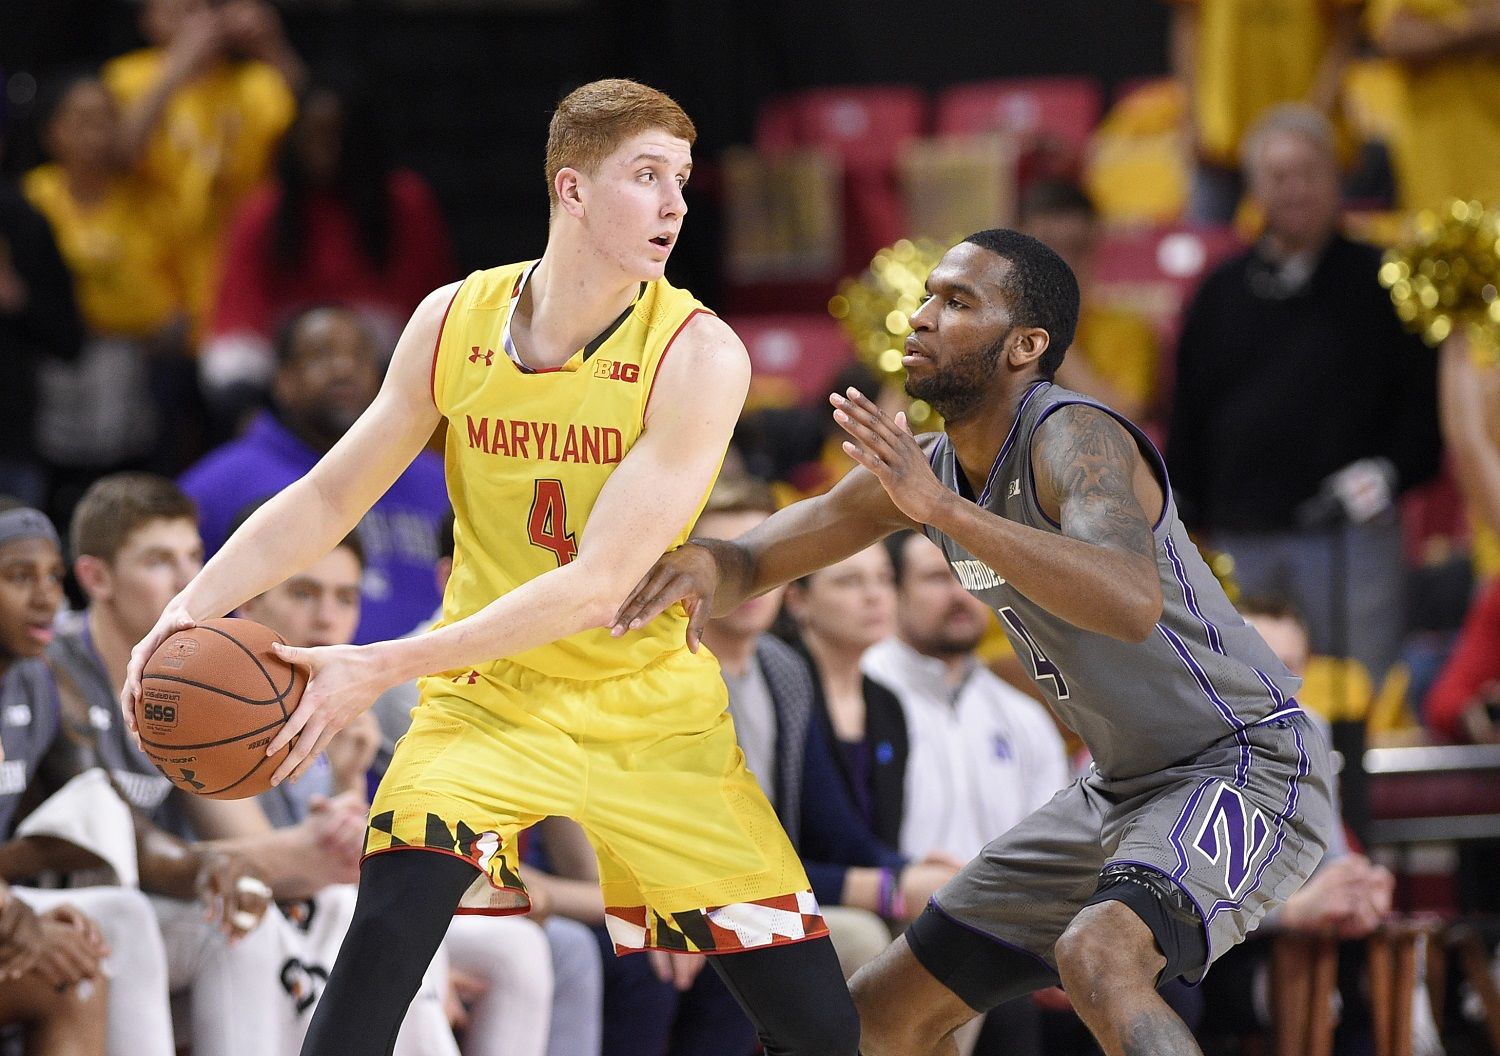 Maryland guard Kevin Huerter, left, handles the ball against Northwestern forward Vic Law, right, during the first half of an NCAA basketball game, Saturday, Feb. 10, 2018, in College Park, Md. (AP Photo/Nick Wass)